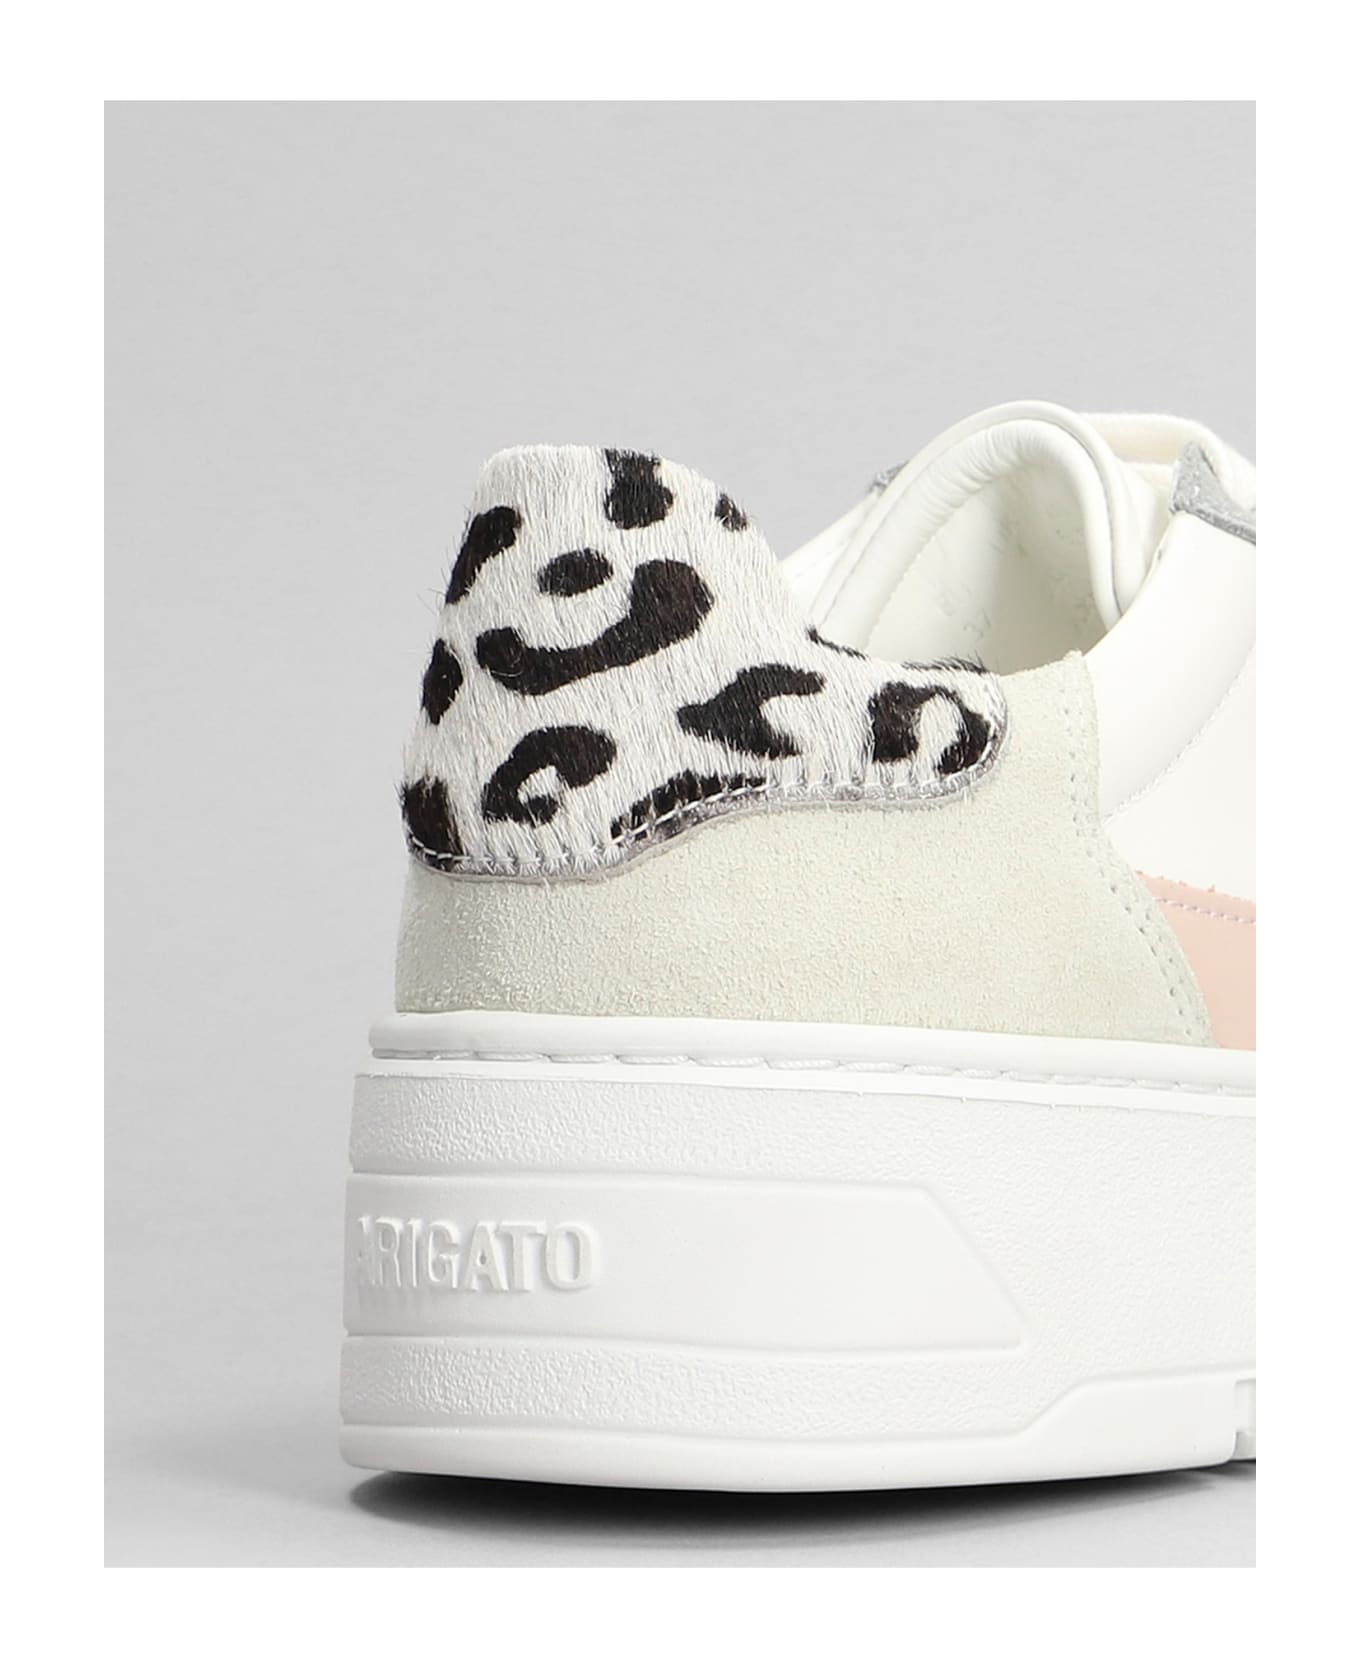 Axel Arigato Orbit Sneakers In White Suede And Leather - white